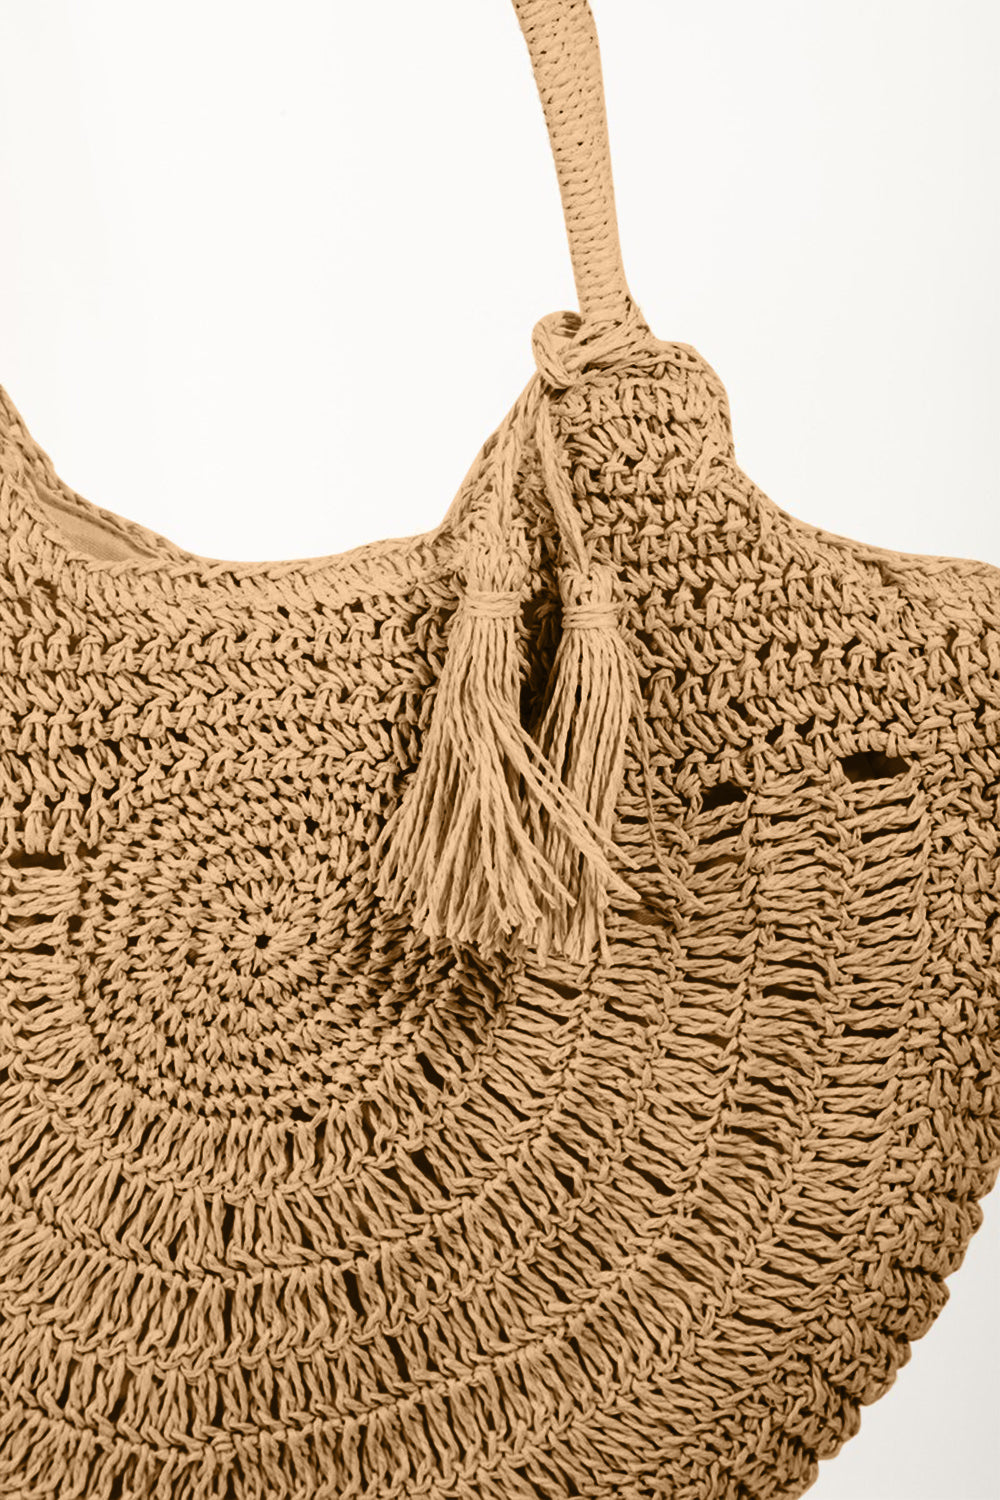 Fame Straw Braided Tote Bag with Tassel - AllIn Computer